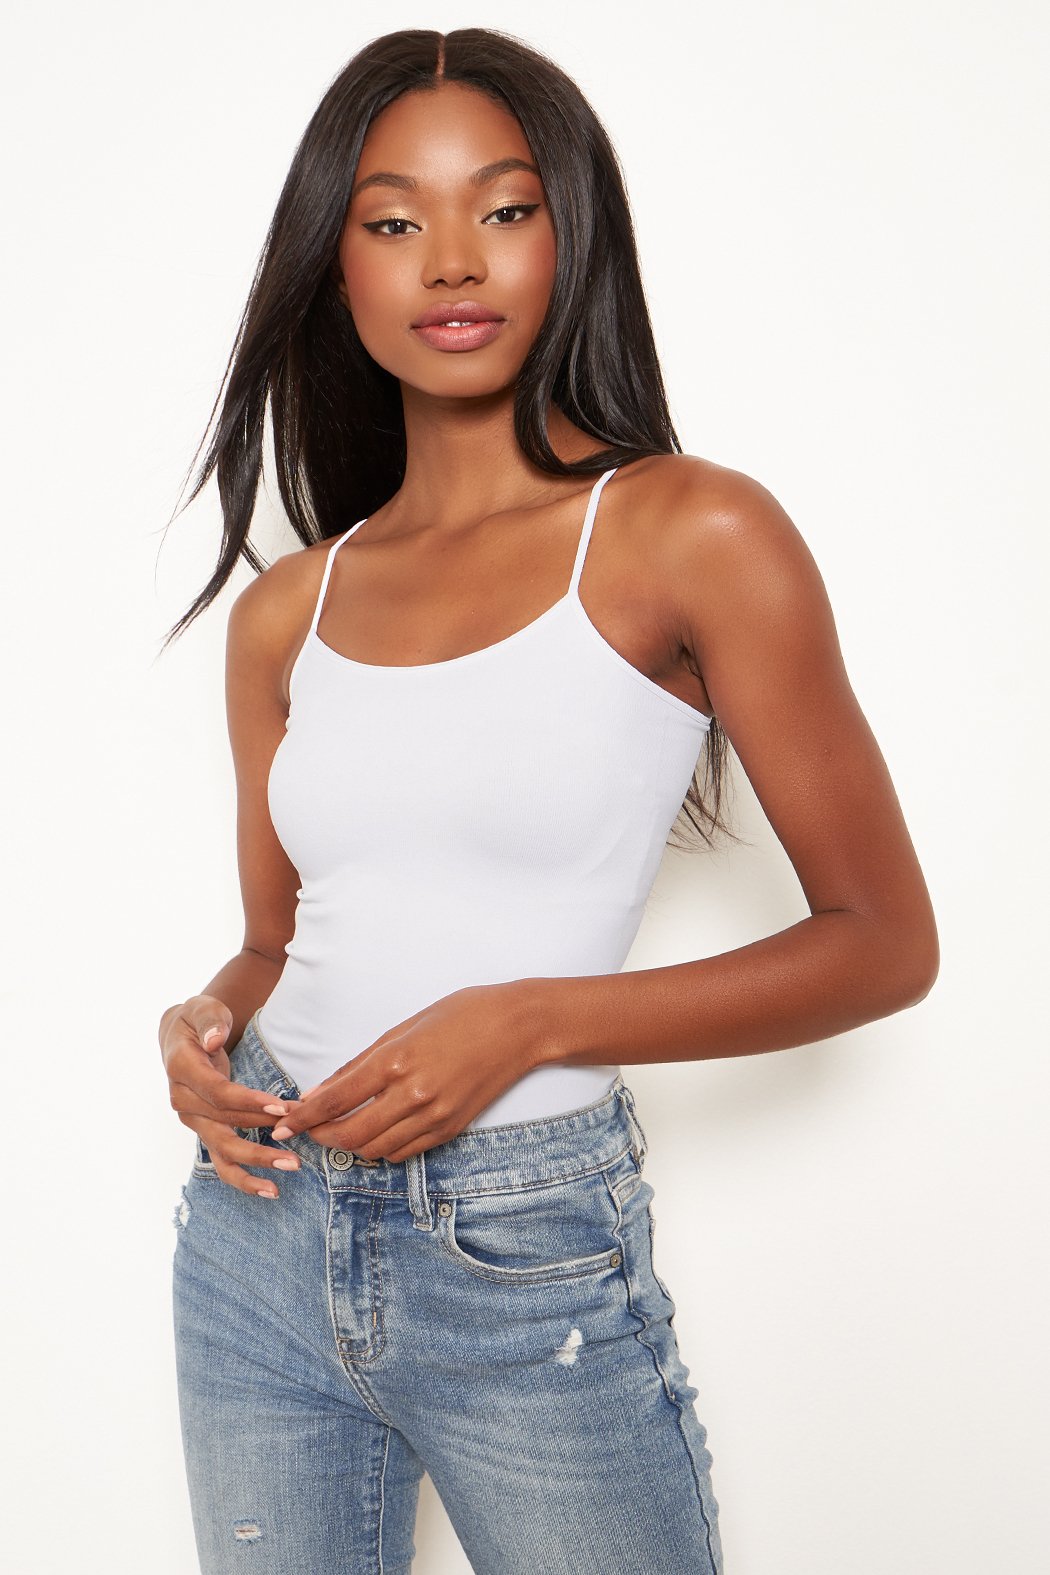 Women's White Camis - Camisoles, Bra Camis and Strappy Tops - Express